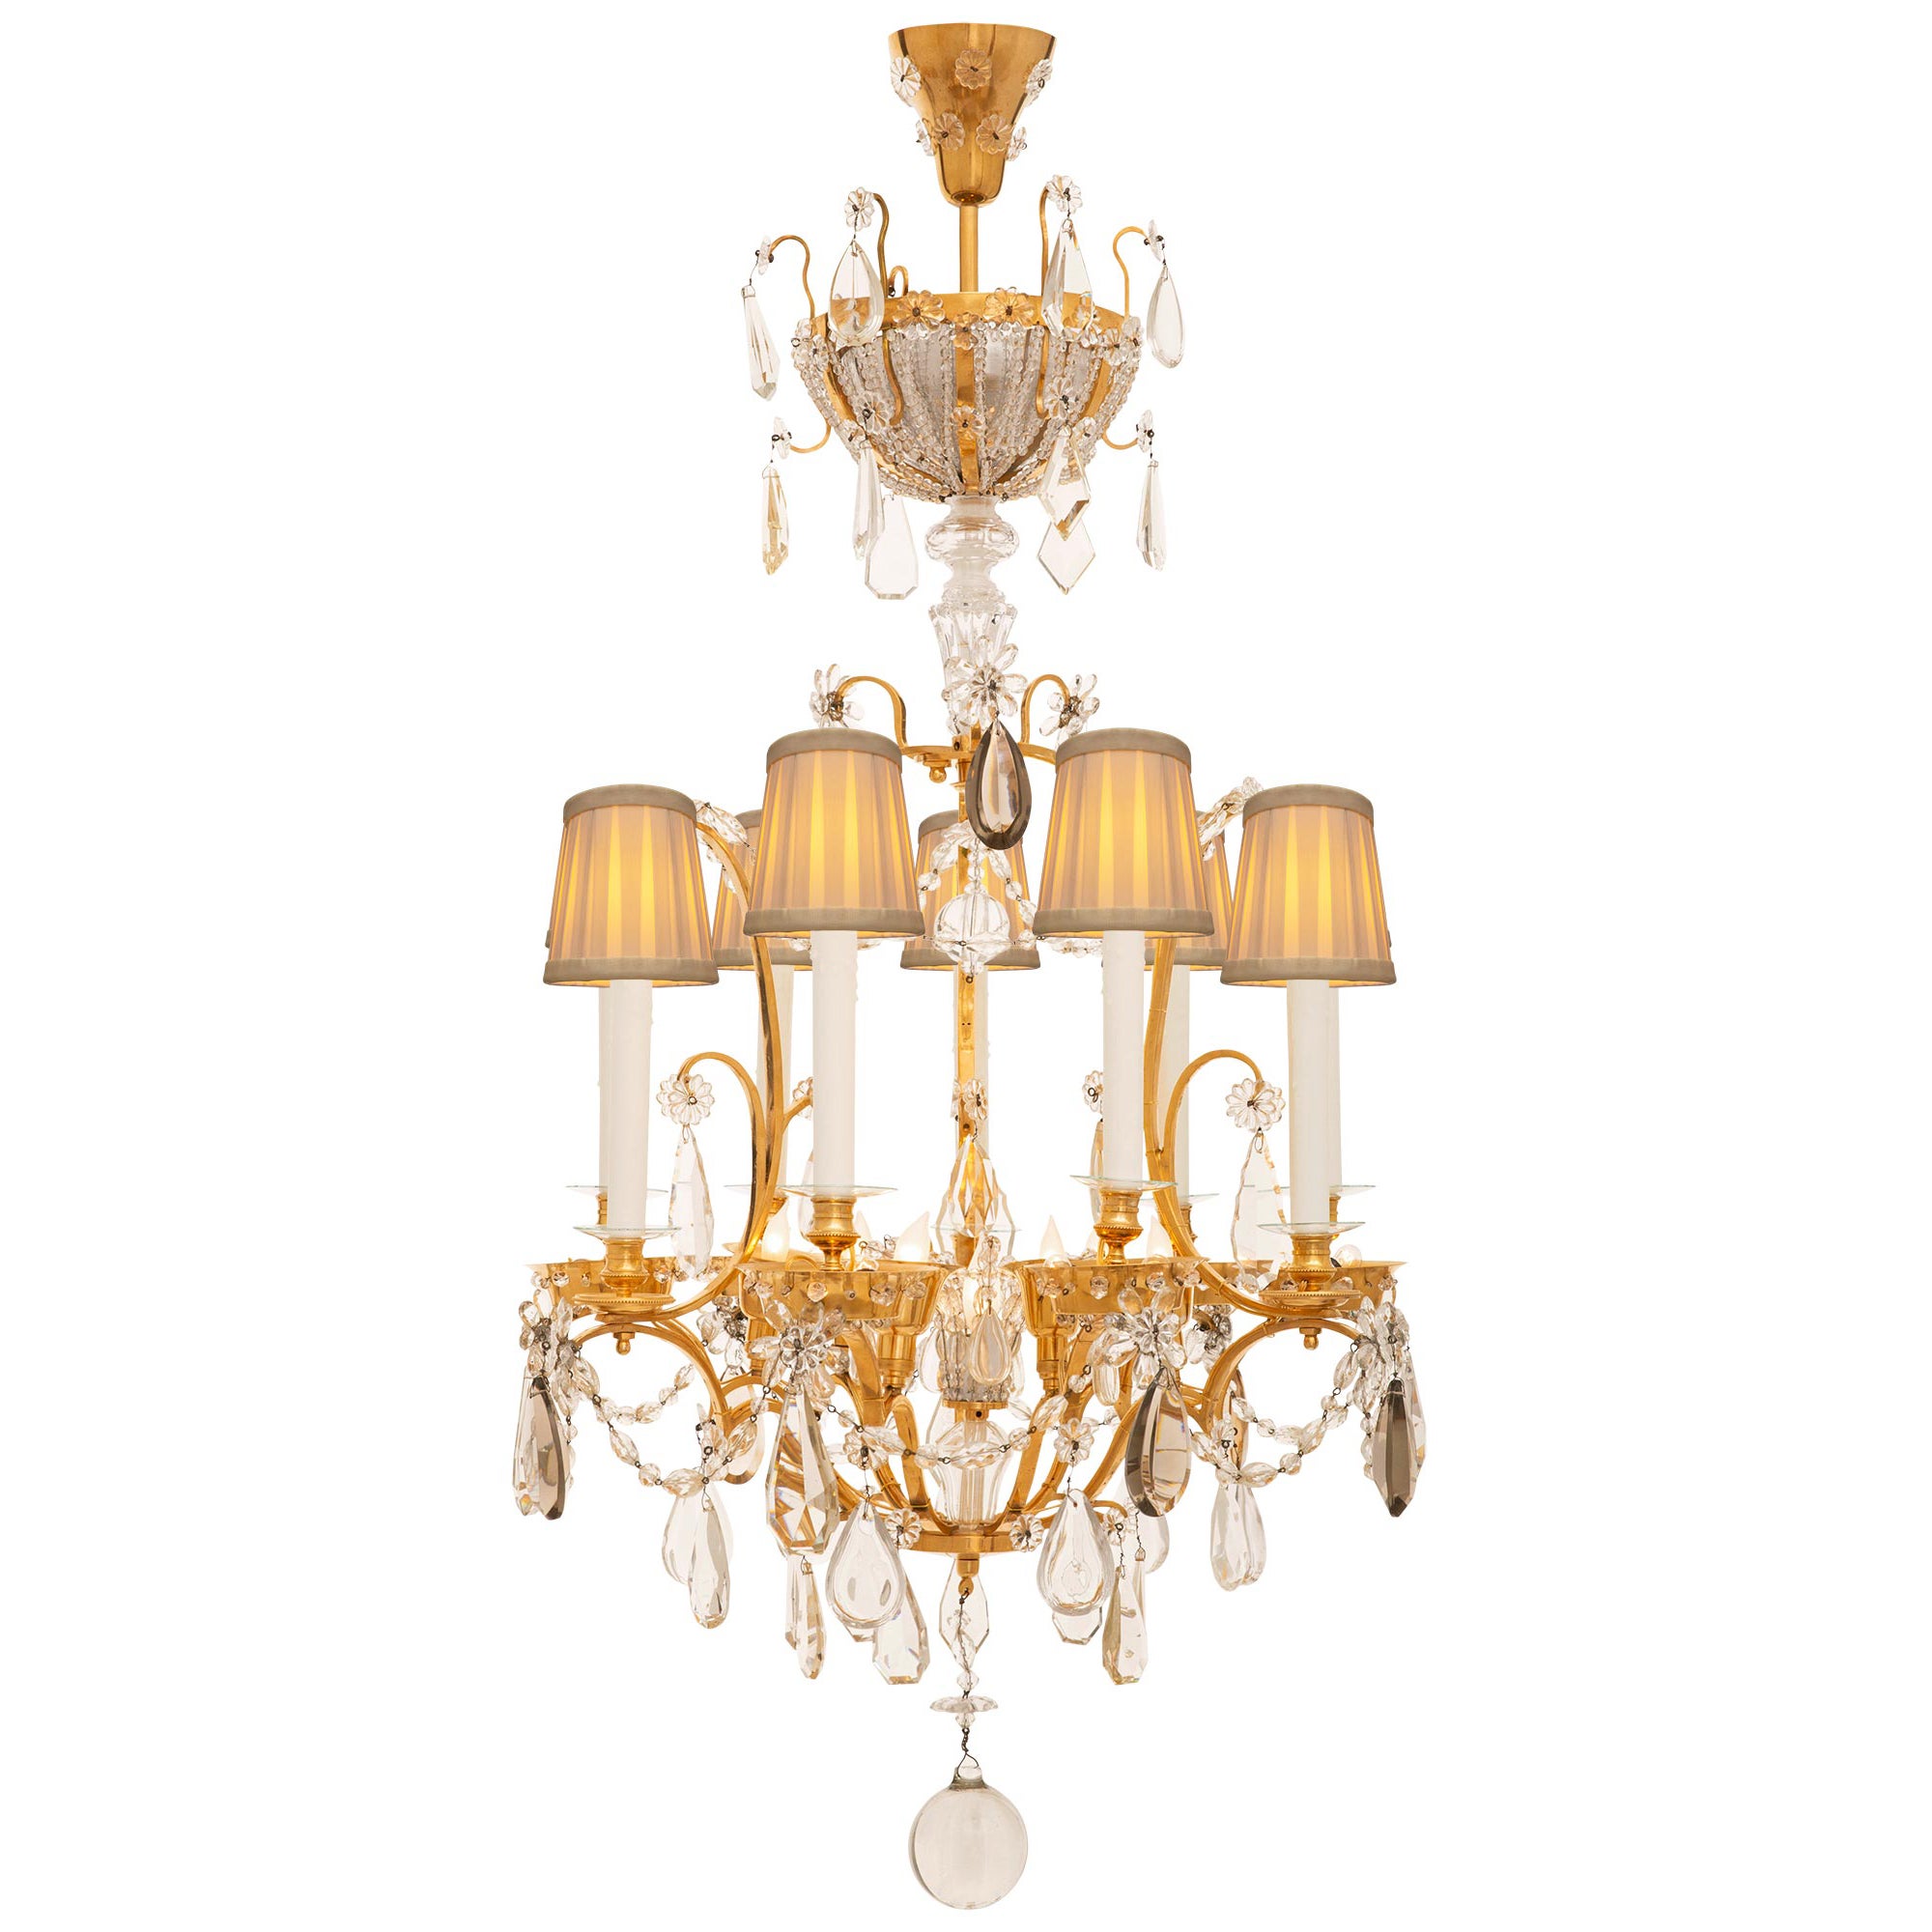 French 19th Century Louis XVI St. Bronze, Ormolu, and Crystal Chandelier